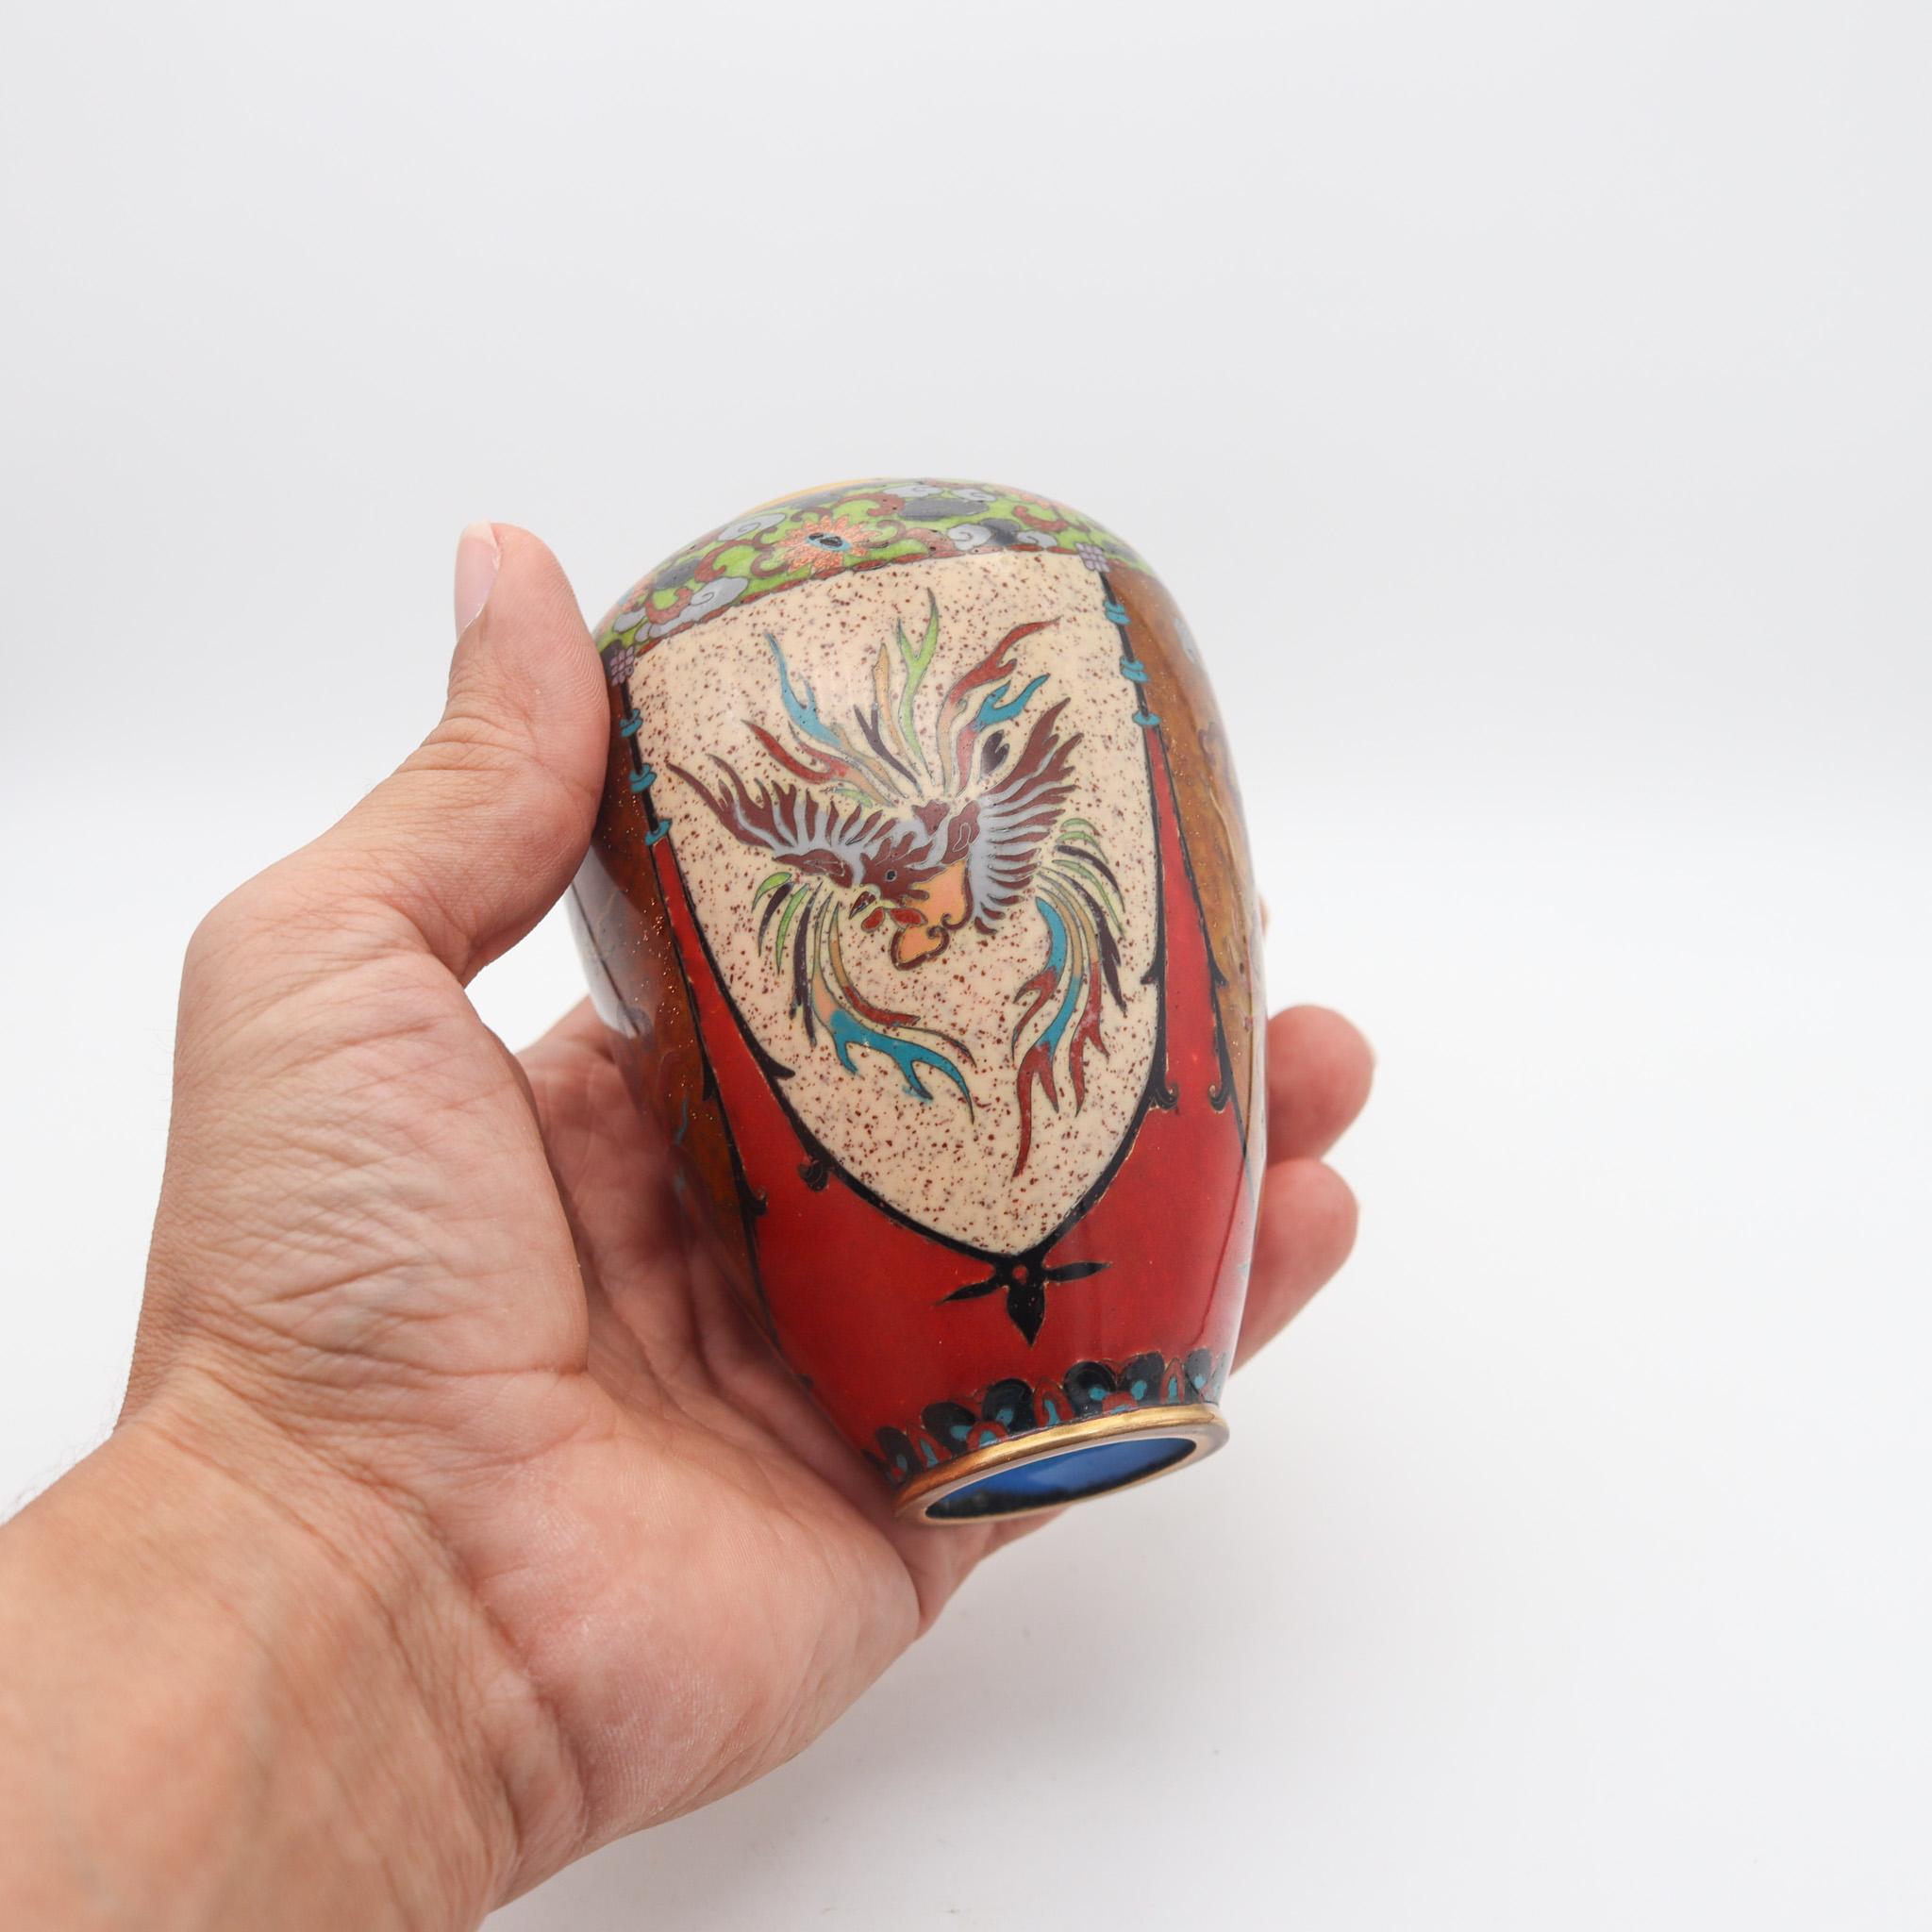 Late 19th Century Japan 1890 Meiji Period Decorative Vase In Cloisonné Enamel With Wood Base For Sale